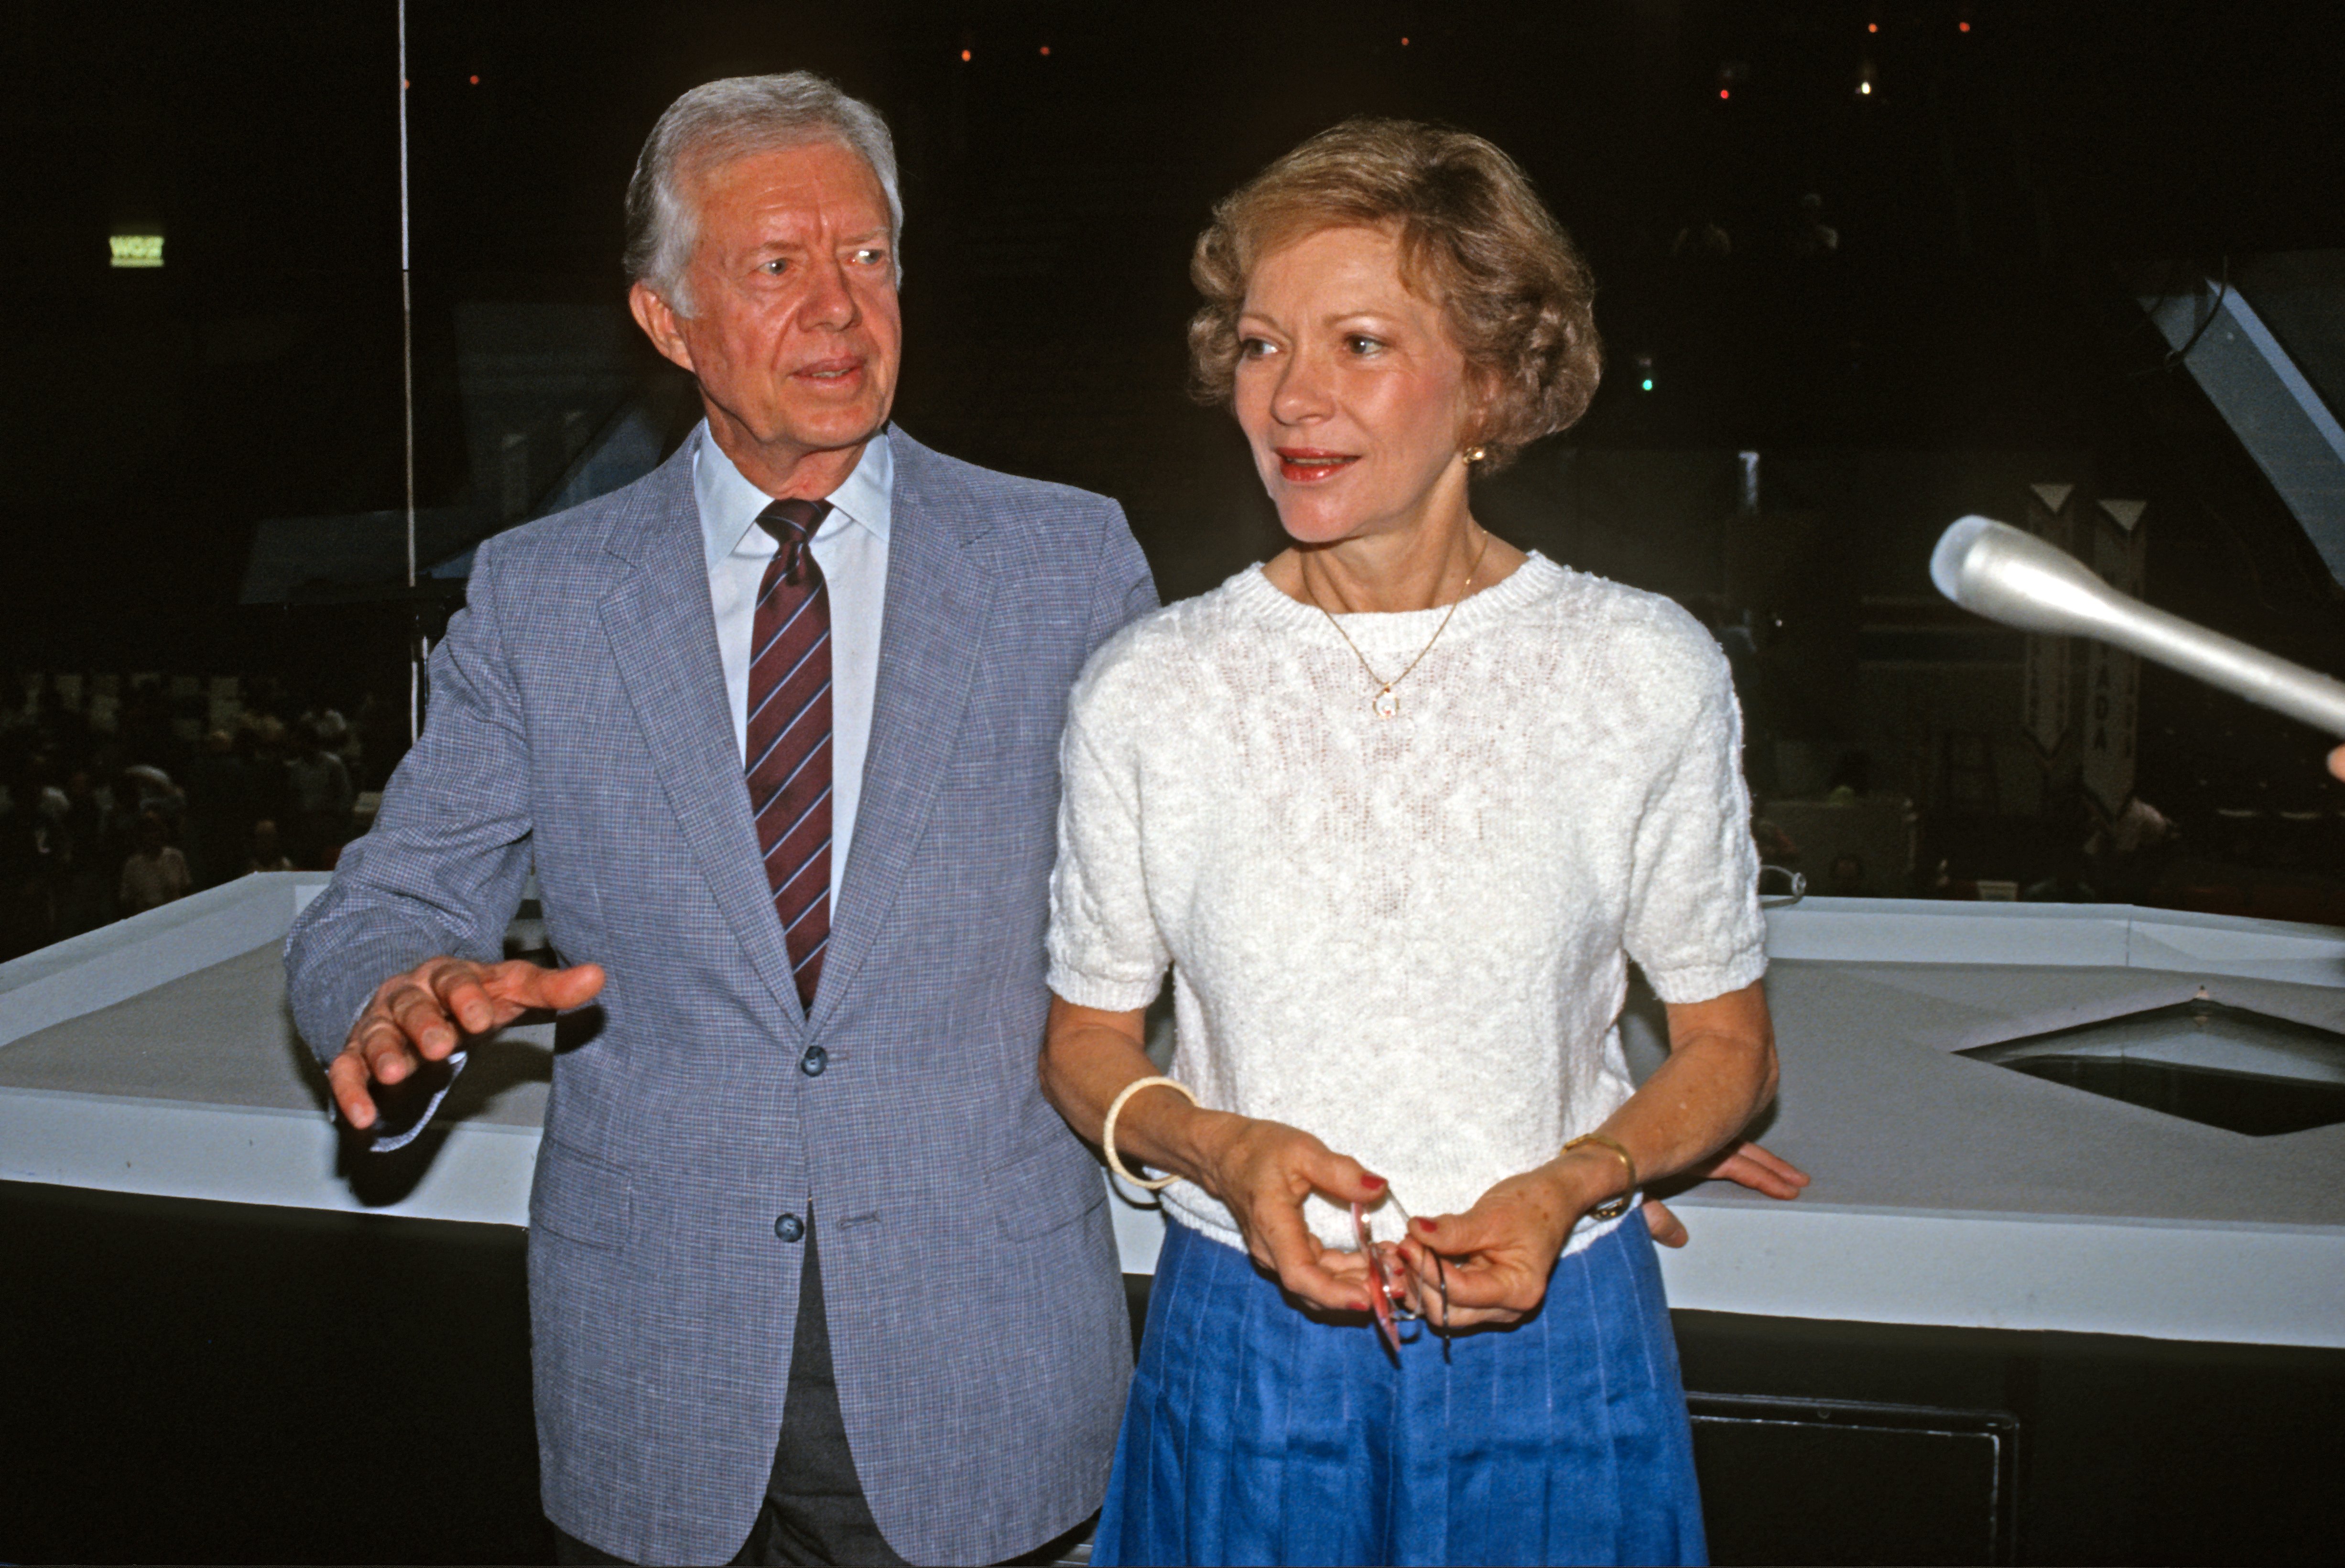 Former US President Jimmy Carter and former First Lady Rosalynn Carter at the Democratic National Convention, at the Omni Coliseum, Atlanta, California, July 18, 1988. | Source: Getty Images